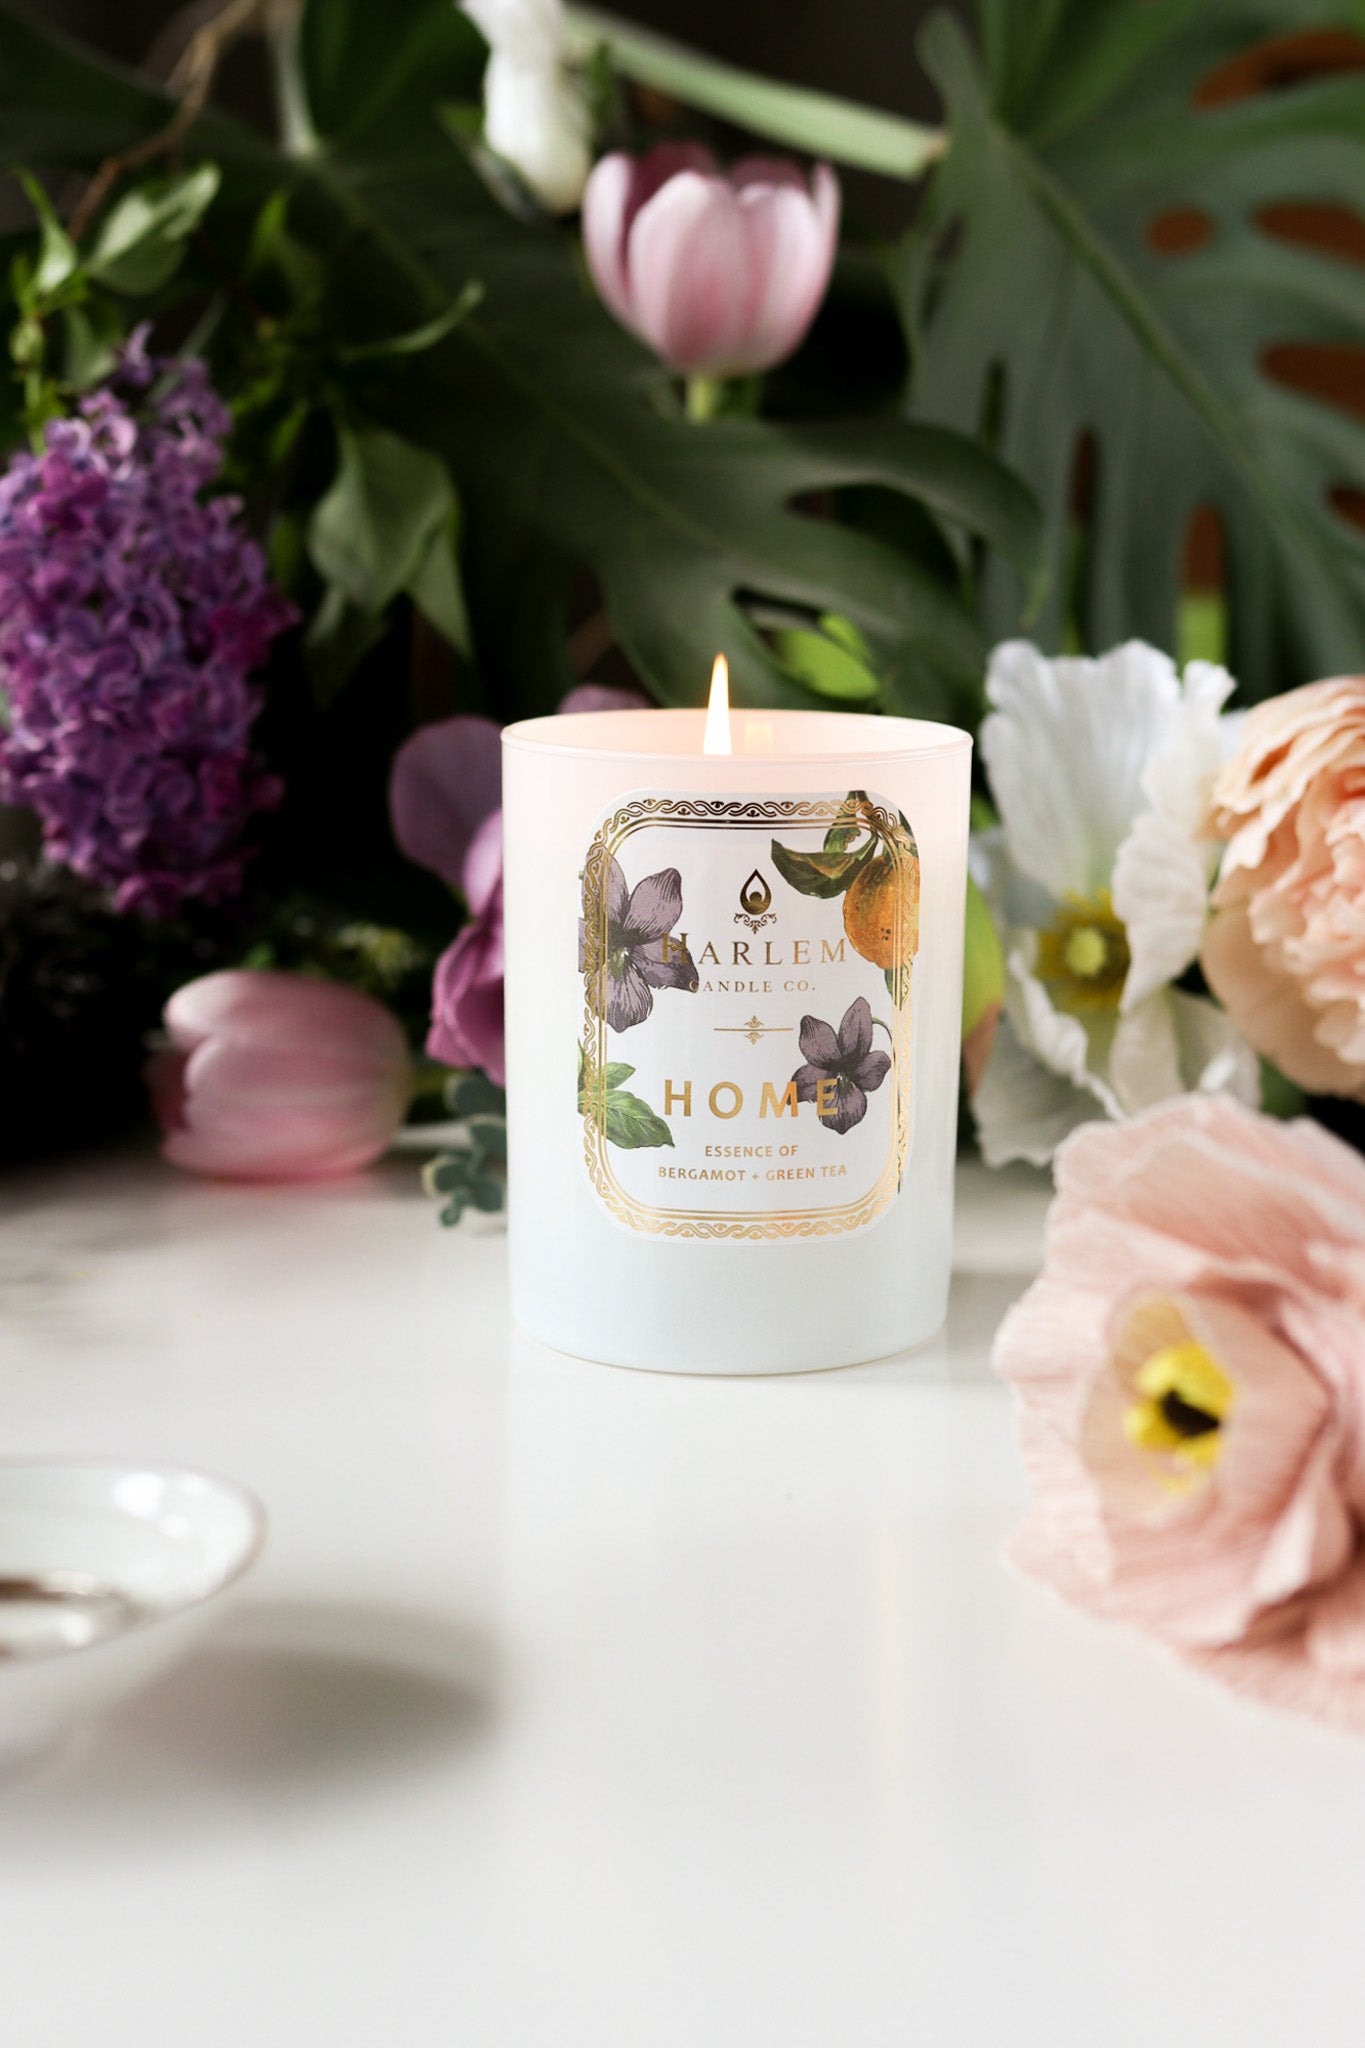 This is a vertical life style image of the "Home" Luxury Candle with flowers in the background.